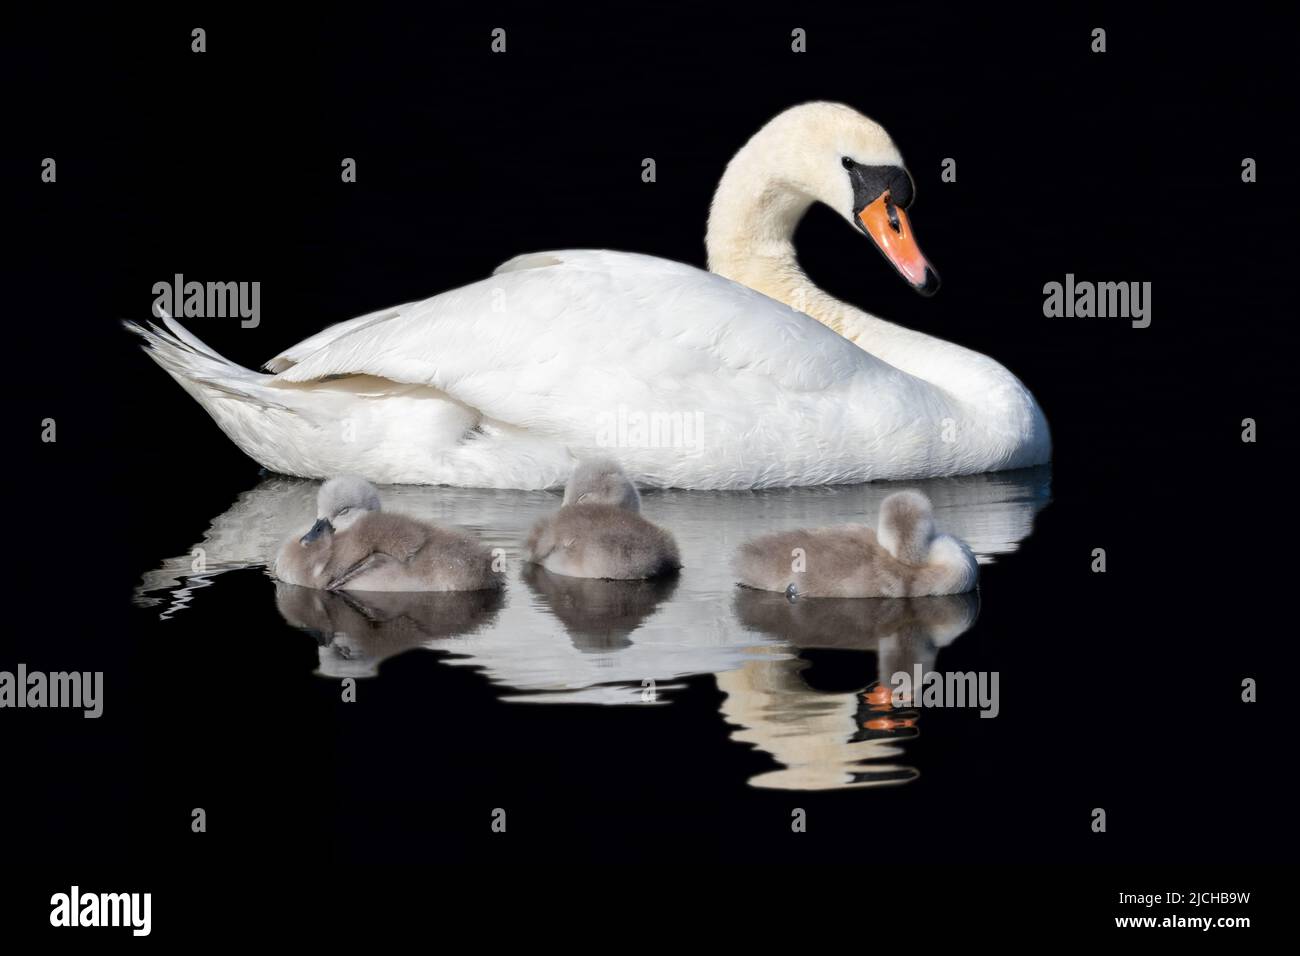 White swan with three sleeping chicks or cygnets 'Cygnus olor'. Isolated against dark background. Reflection on water. Grand Canal, Dublin, Ireland Stock Photo